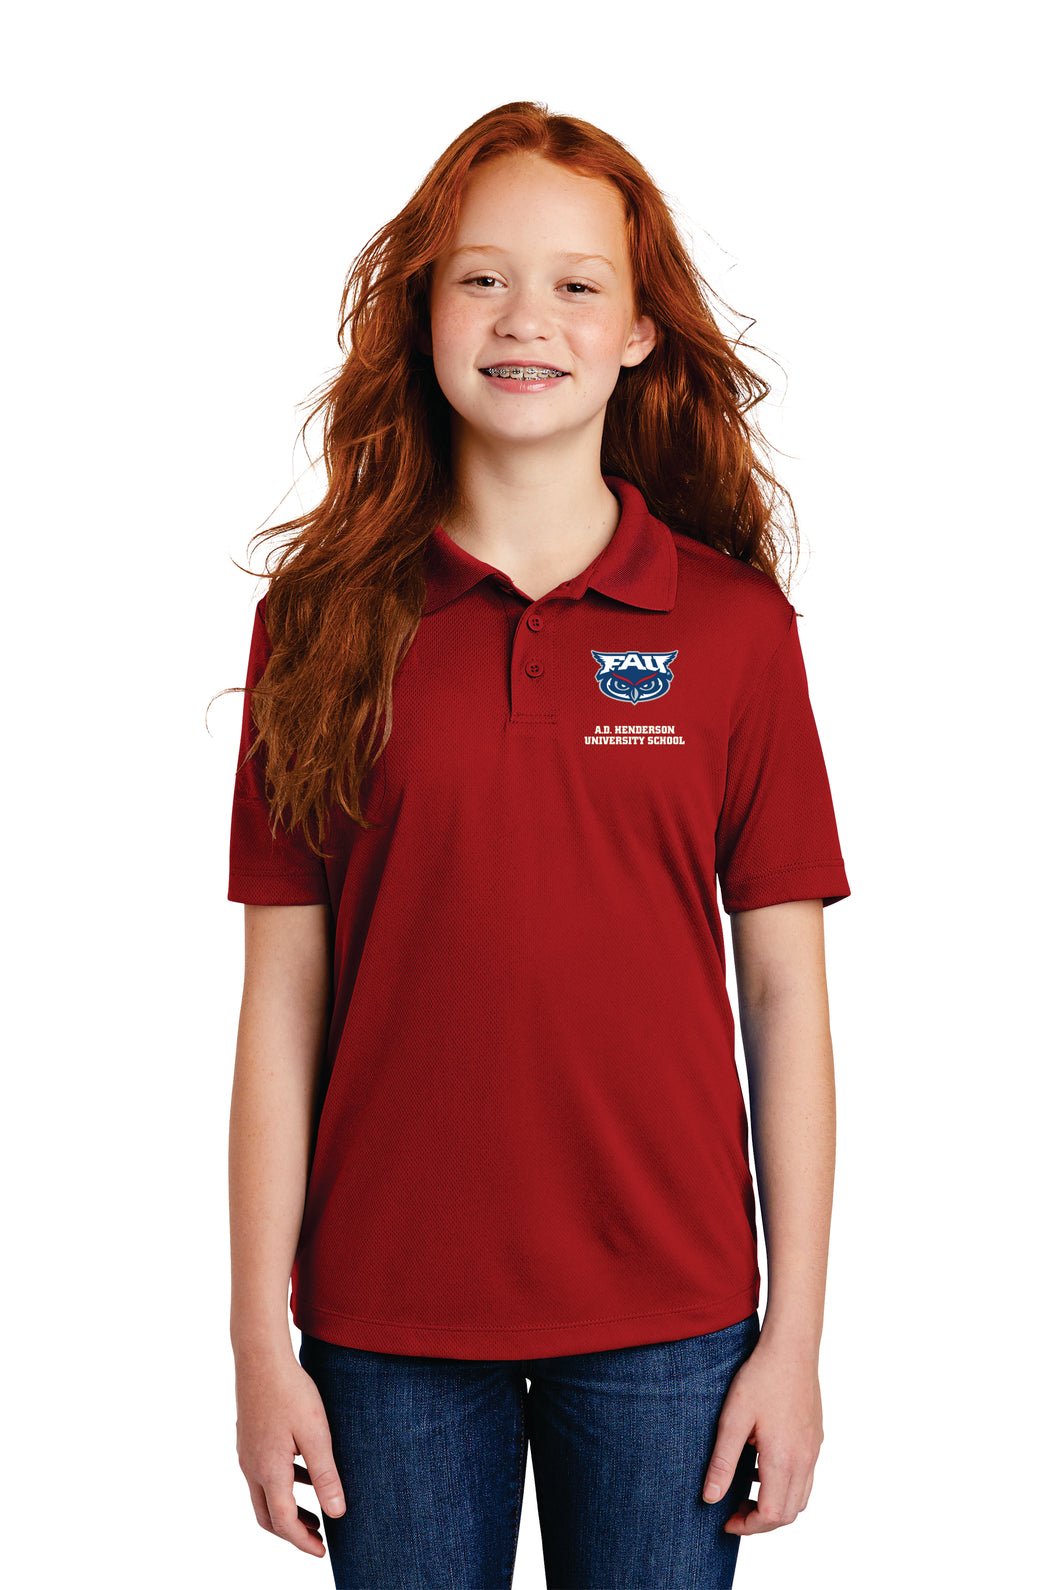 YST640 Youth Port Authority 100% Moisture wicking Polo 6th-8th Grade Embroidery FAU